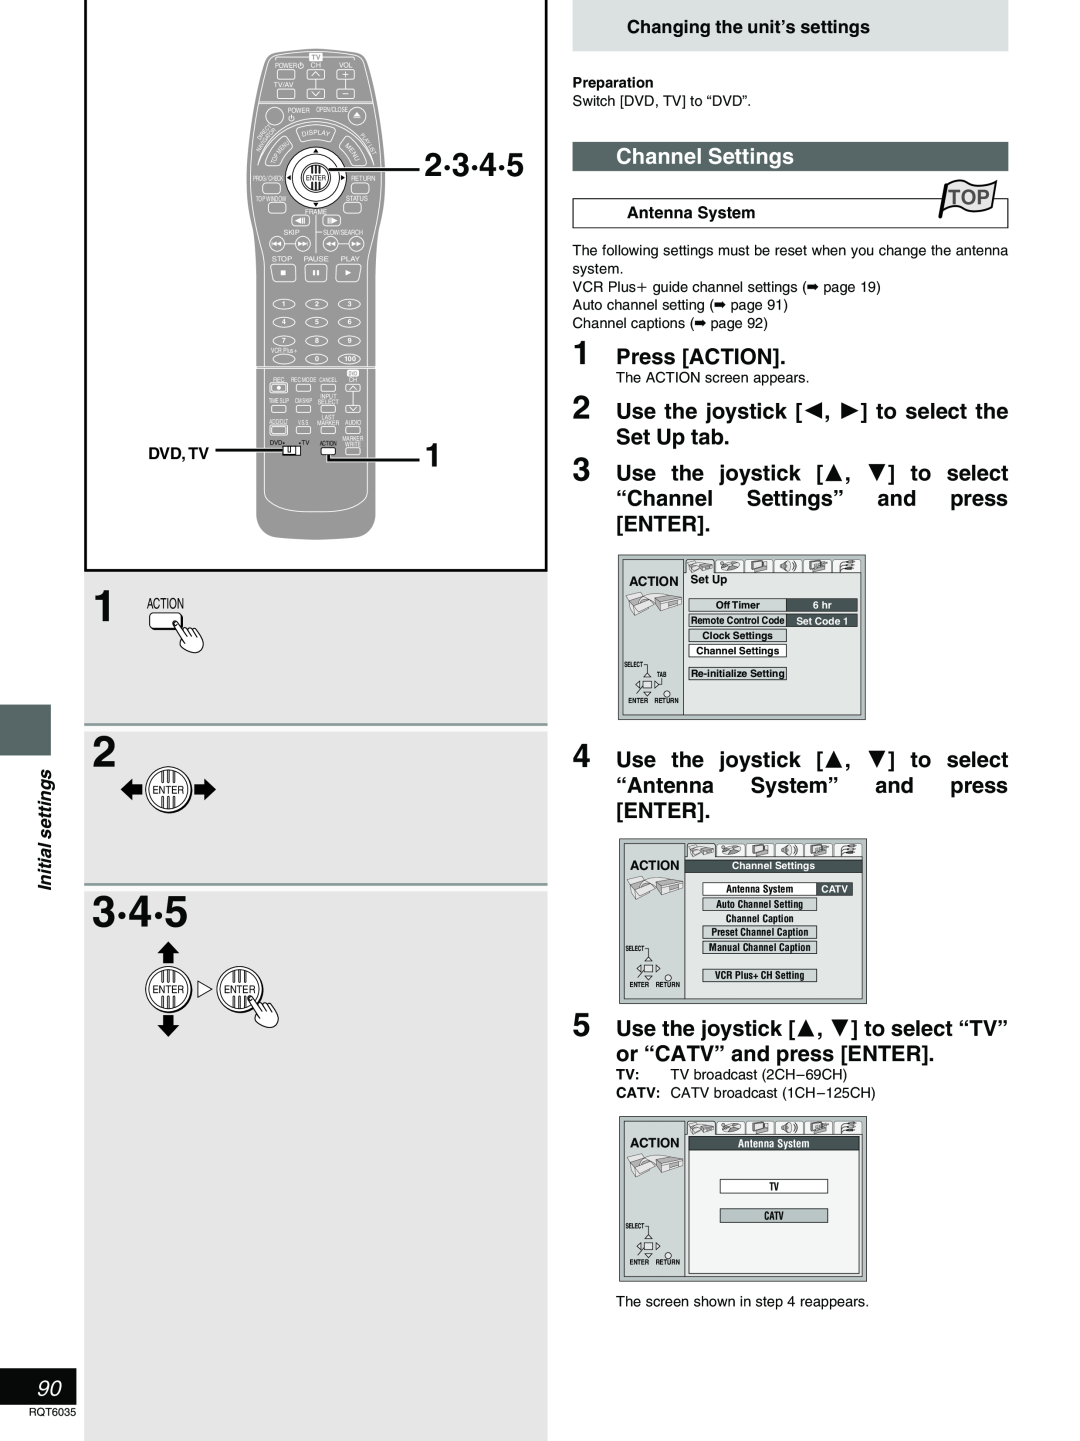 Panasonic DMR-E20 2·3·4·5, Channel Settings, Press ACTION, Use the joystick 2, 1 to select the Set Up tab, Dvd, Tv 